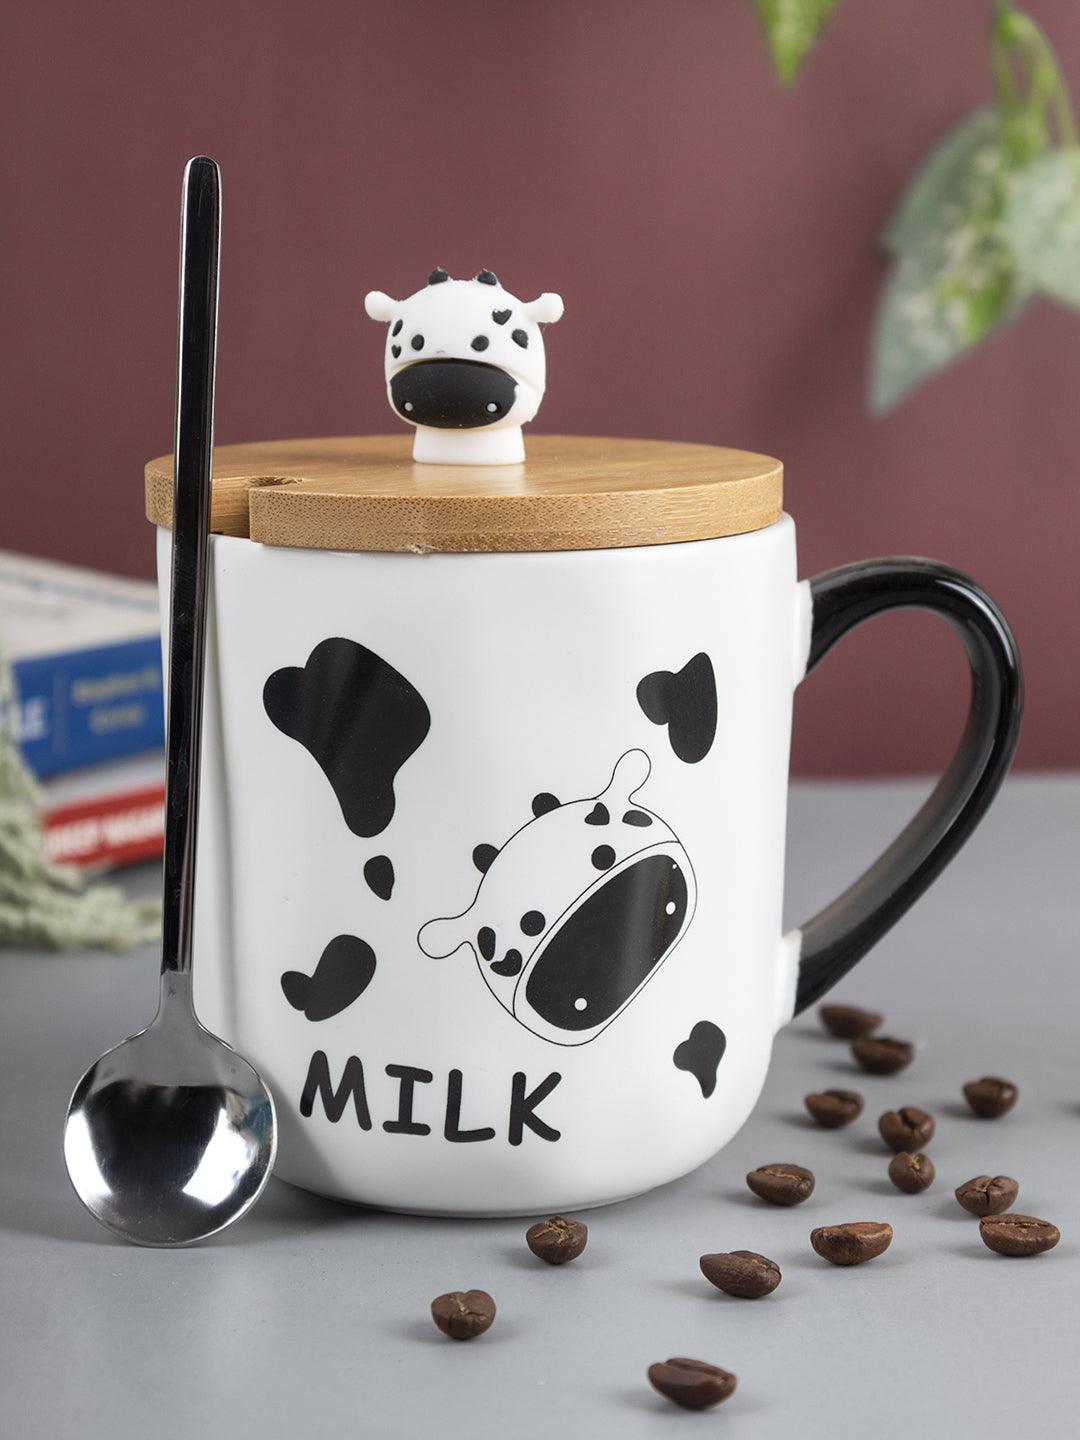 Set of funny cups for a coffee with milk in the shape of a coffee pot